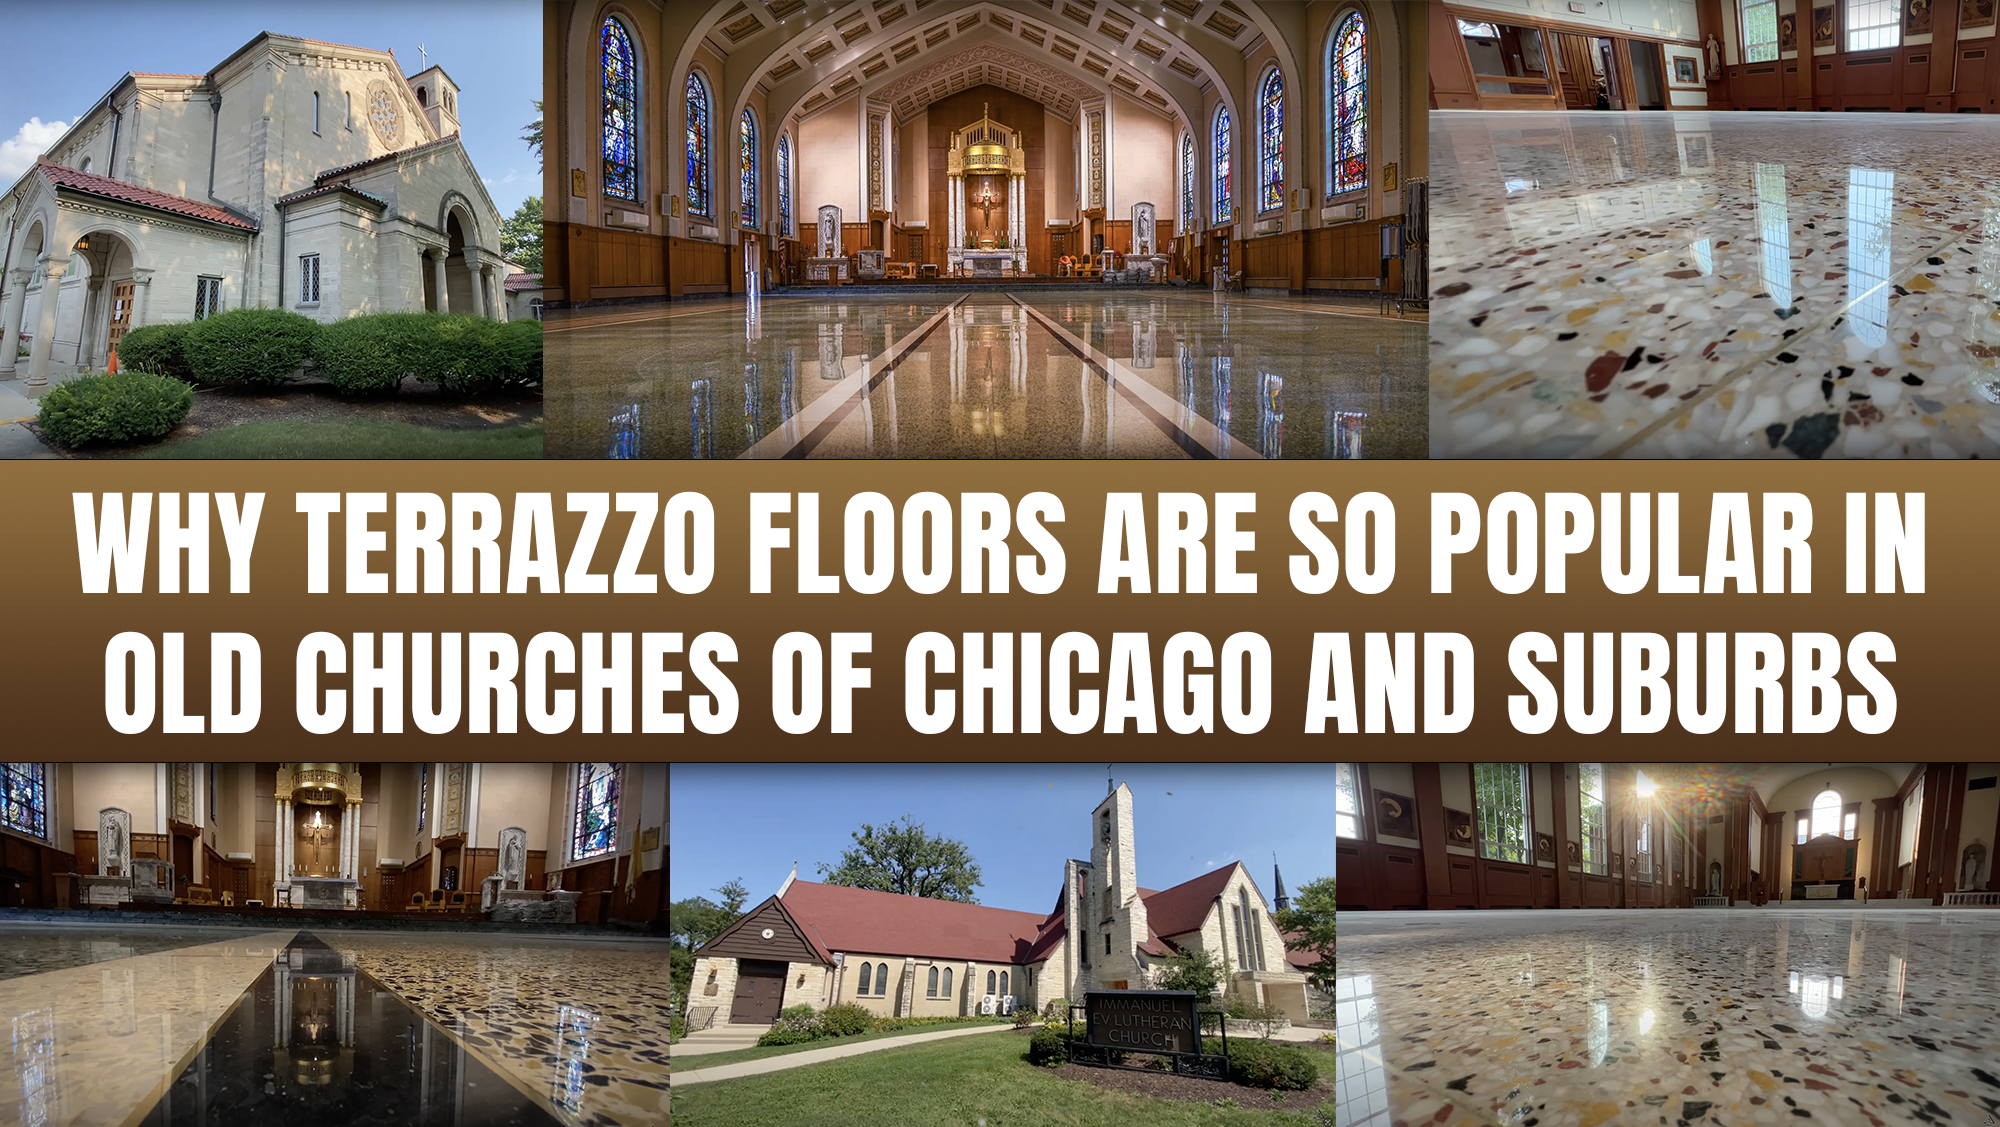 Why terrazzo floors are so popular in old churches of Chicago and suburbs